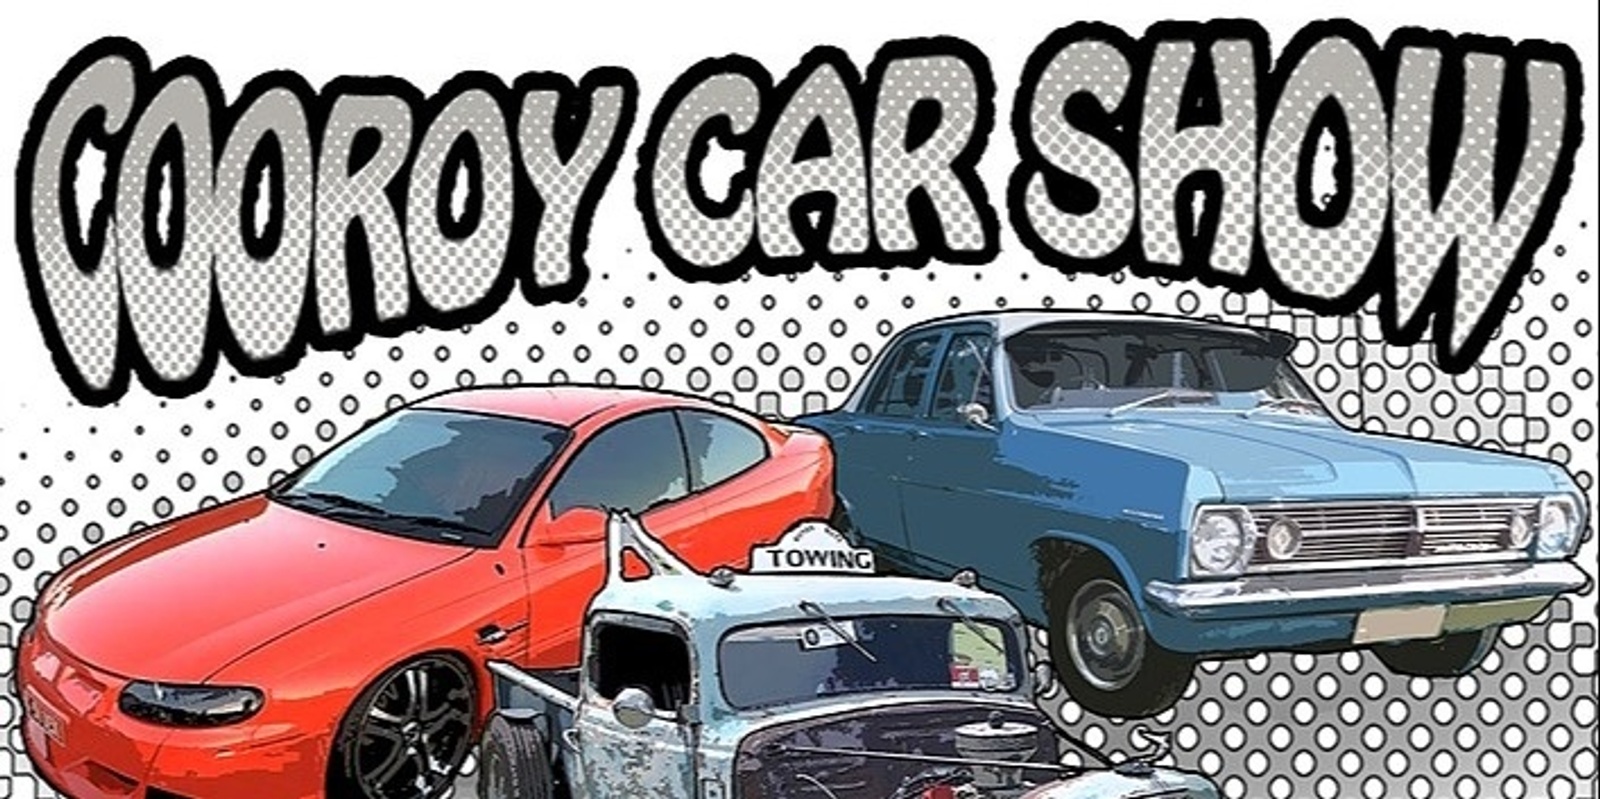 Banner image for 2021 Cooroy Car Show